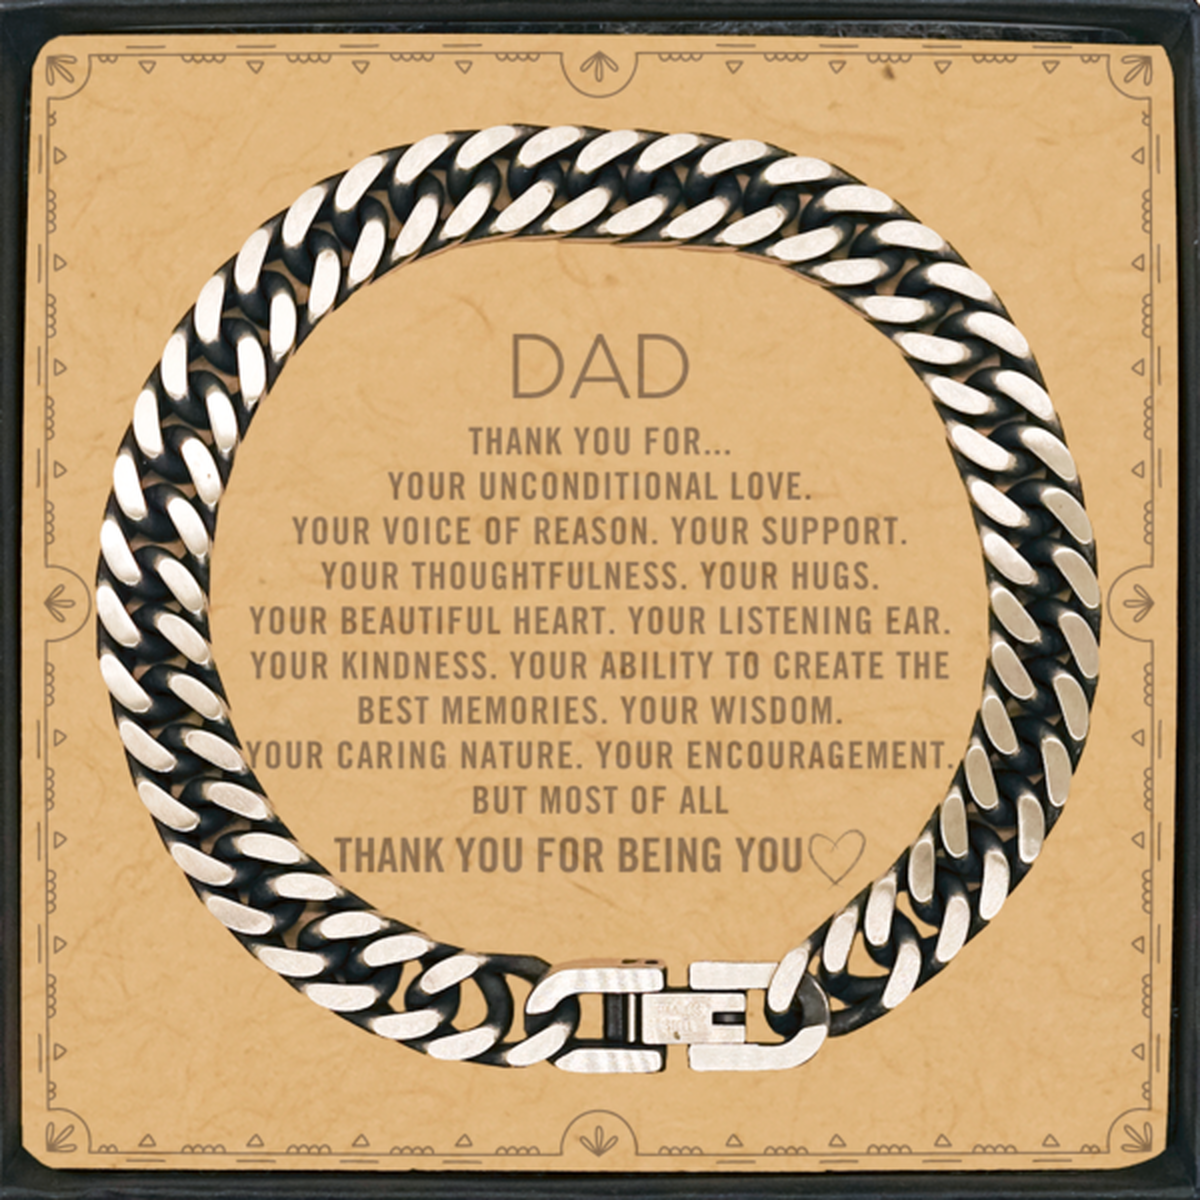 Dad Cuban Link Chain Bracelet Custom, Message Card Gifts For Dad Christmas Graduation Birthday Gifts for Men Women Dad Thank you for Your unconditional love